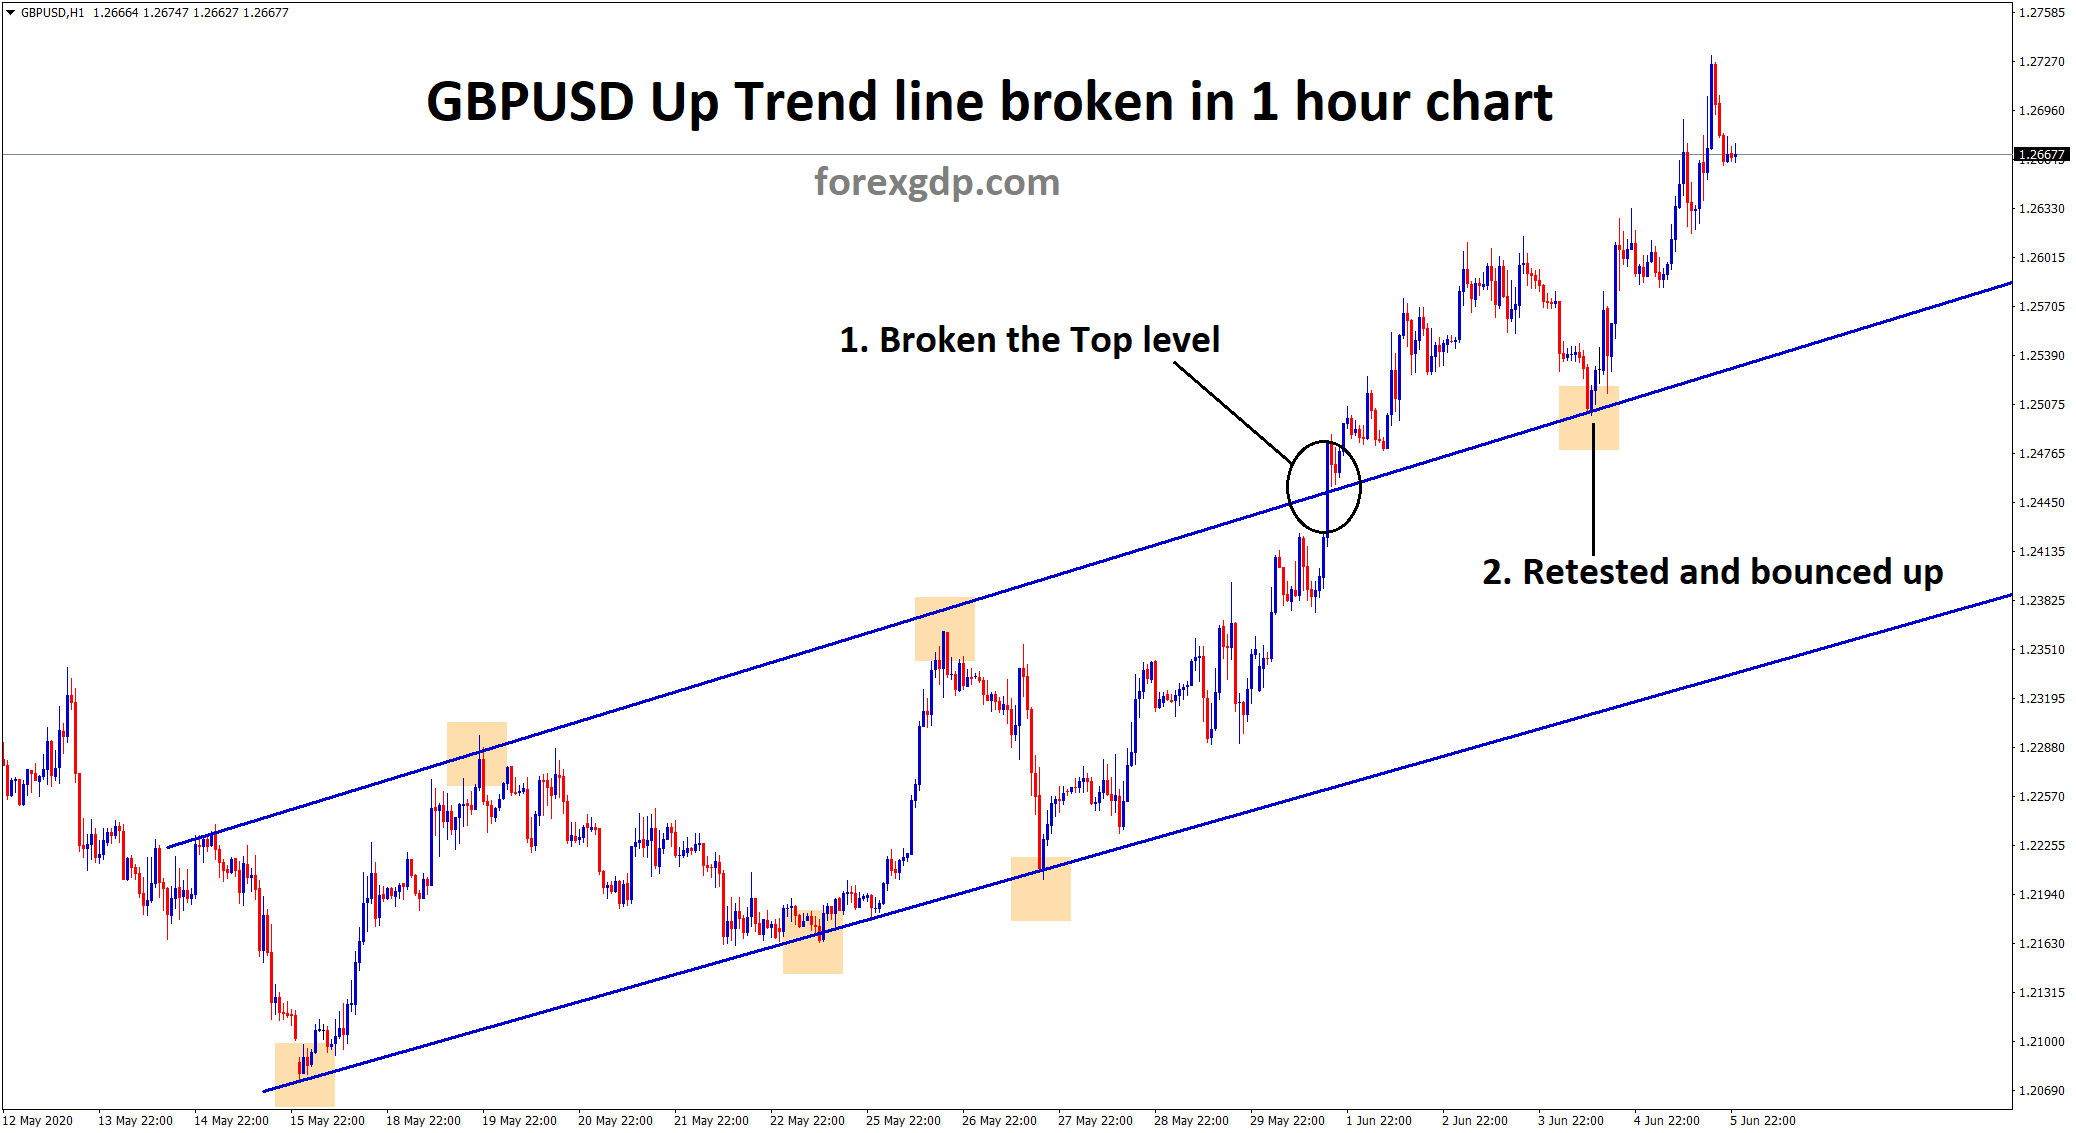 gbpusd breakout retest and bounced up in uptrend line